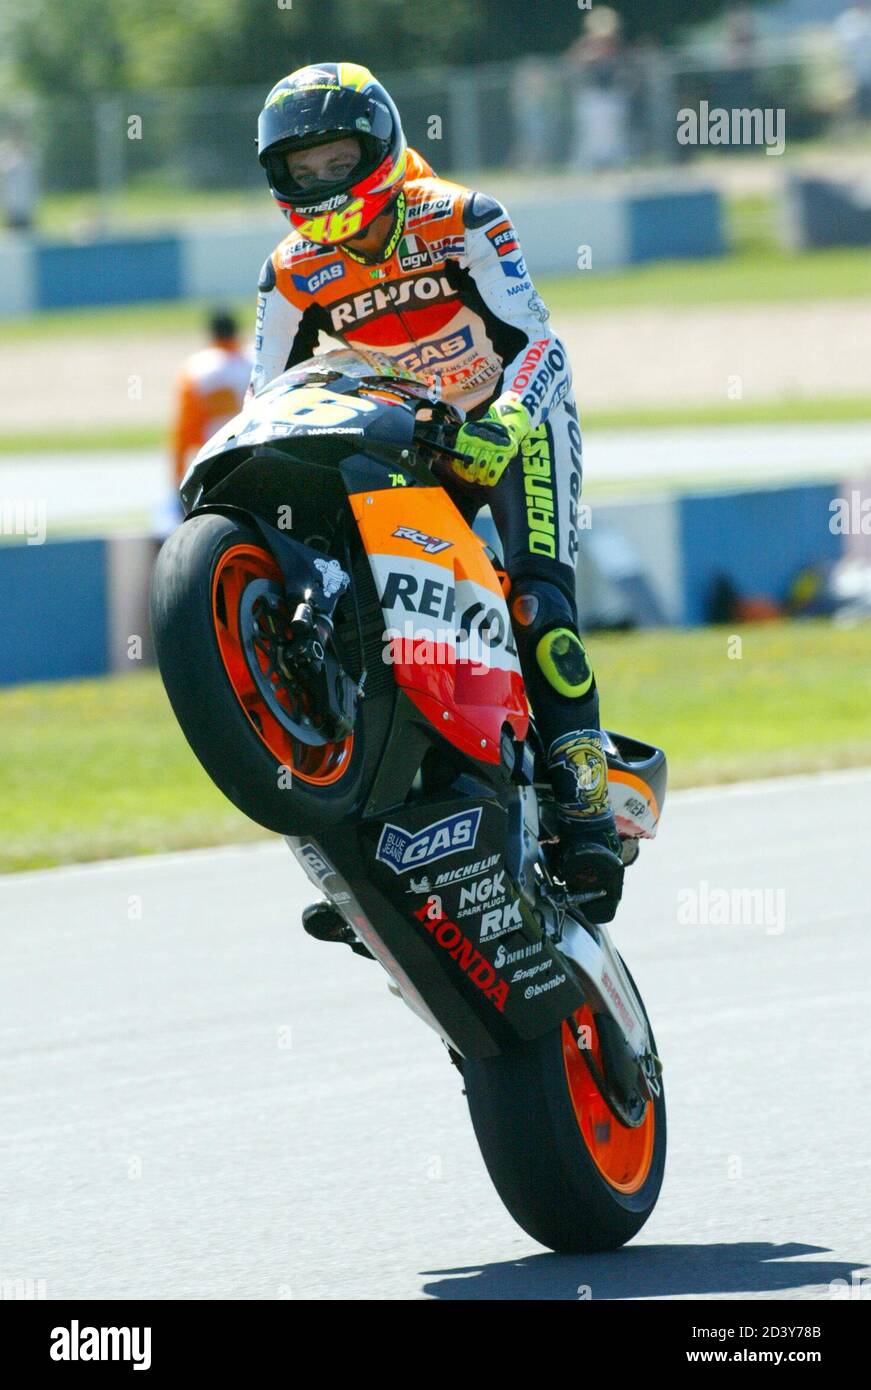 Italy's Valentino Rossi wheelstands his Honda in celebration after winning  the British MotoGP motorcycling Grand Prix at Donington July 12, 2003.  Italy's Max Biaggi was second and Spain's Sete Gibernau third. REUTERS/John